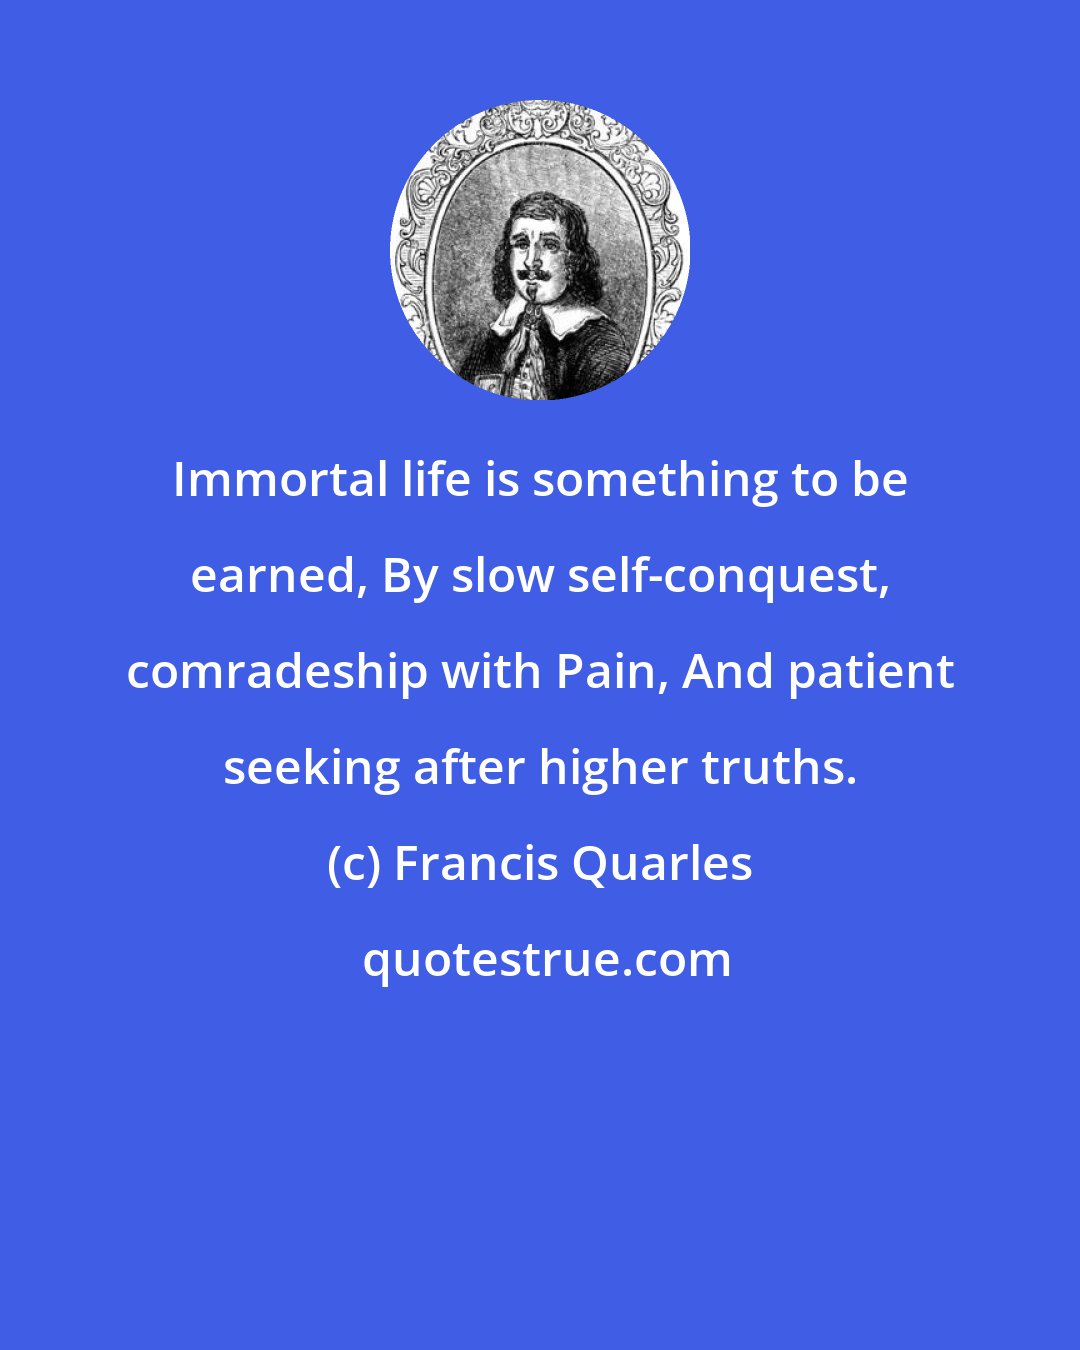 Francis Quarles: Immortal life is something to be earned, By slow self-conquest, comradeship with Pain, And patient seeking after higher truths.